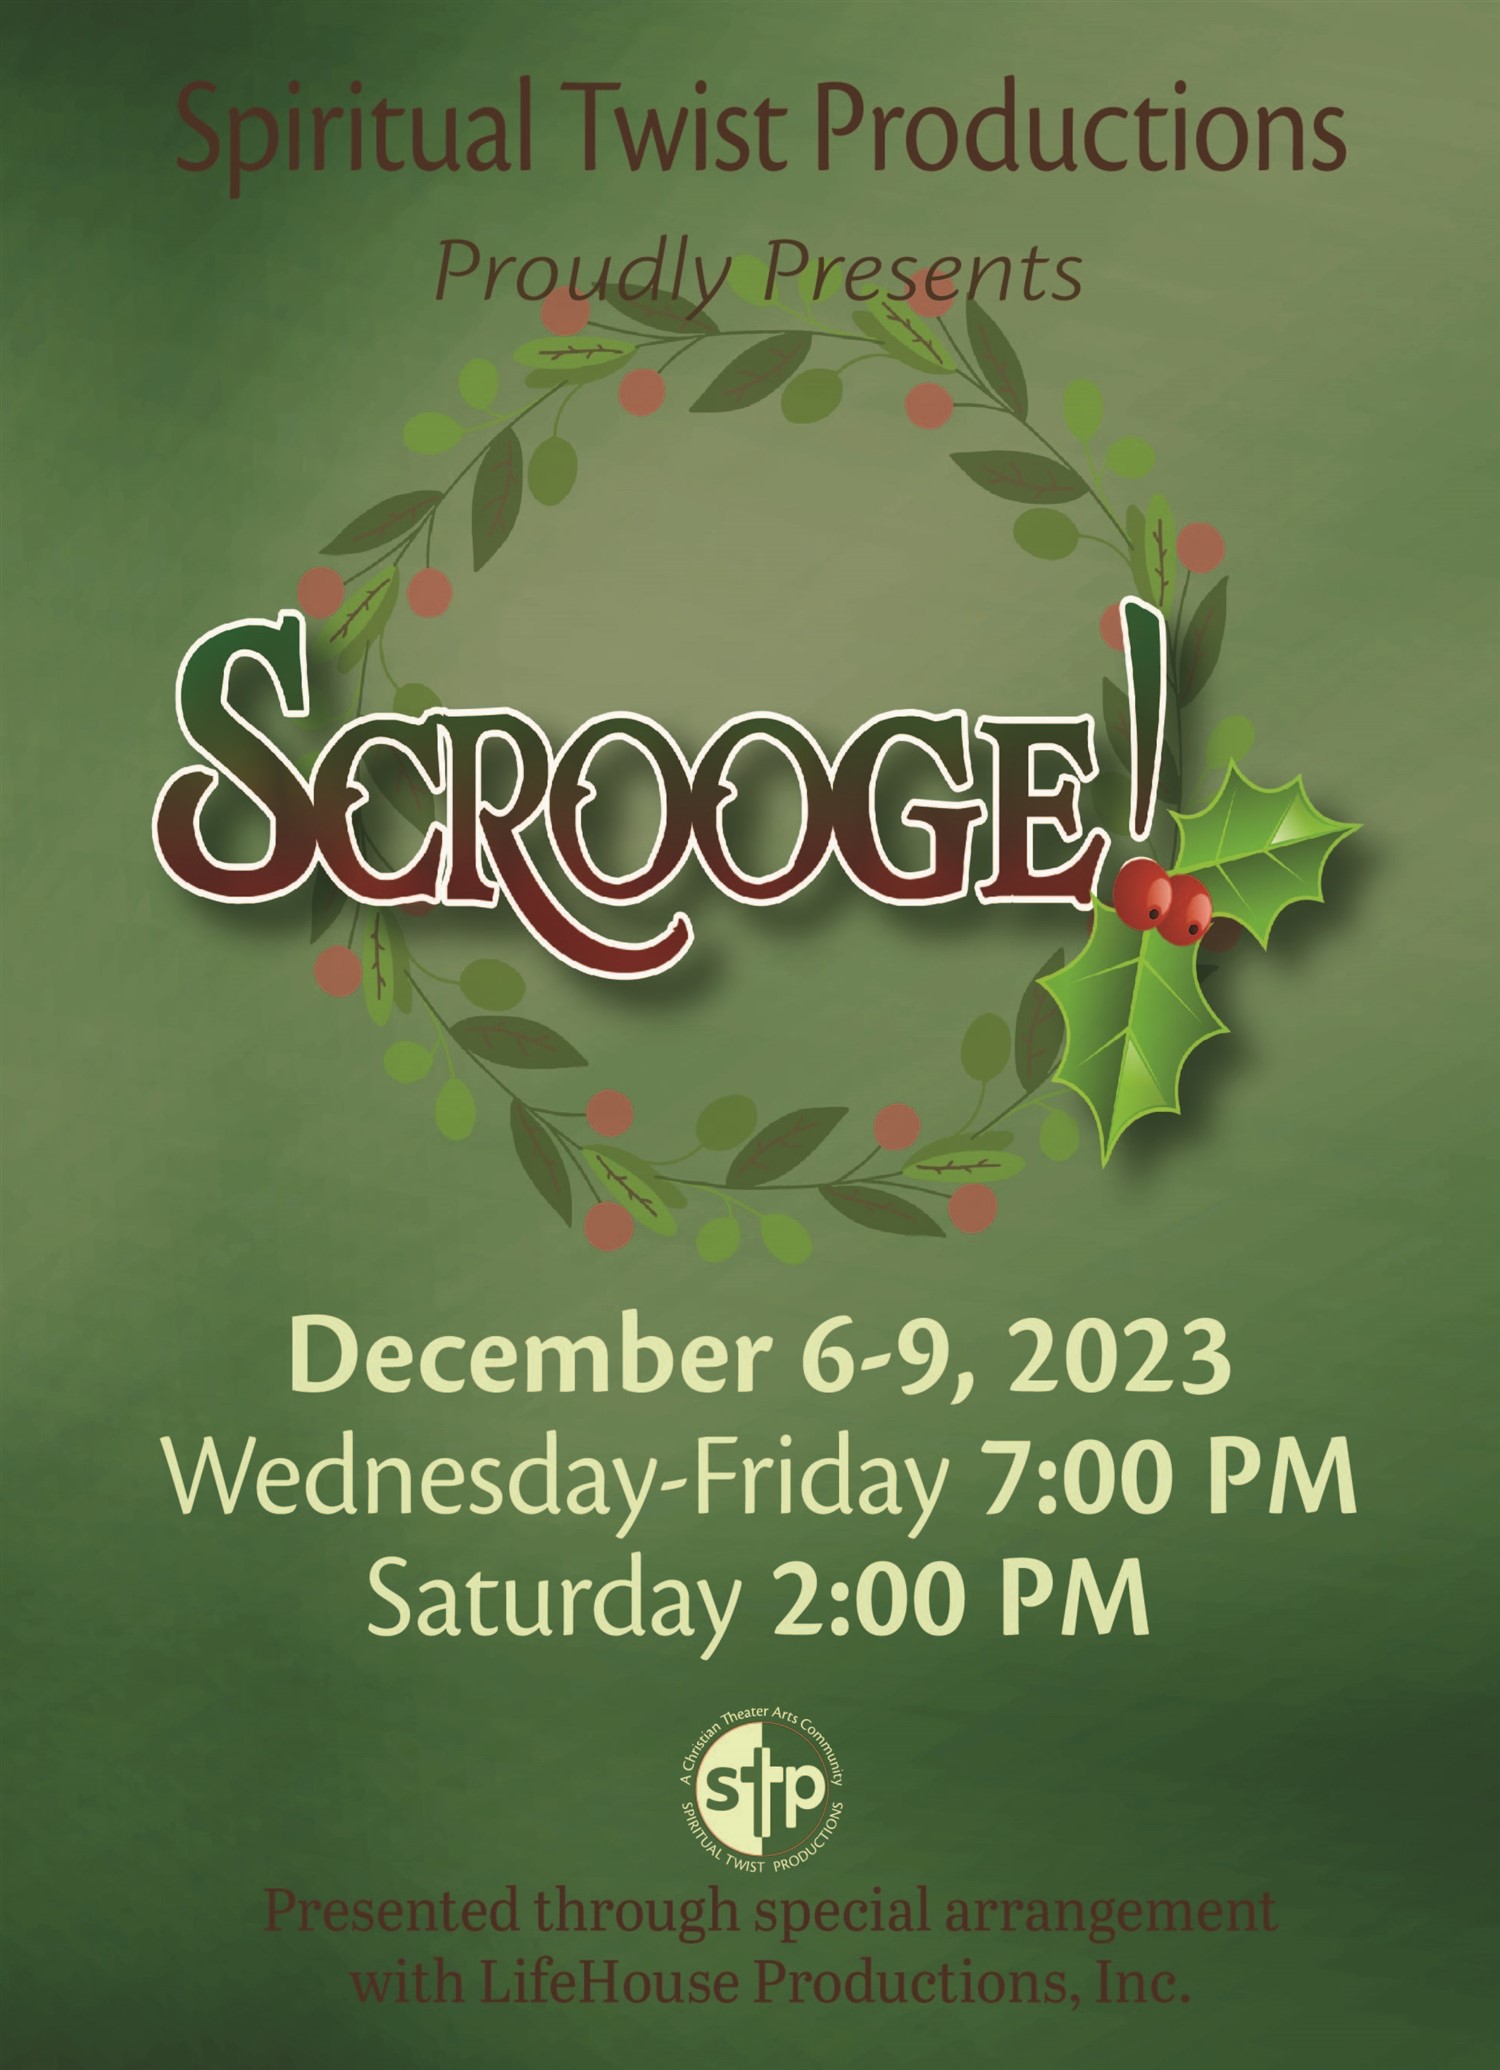 Scrooge! Friday, December 8, 2023 @ 7 PM on Dec 08, 19:00@Spiritual Twist Productions - Pick a seat, Buy tickets and Get information on Spiritual Twist Productions tickets.spiritualtwist.com